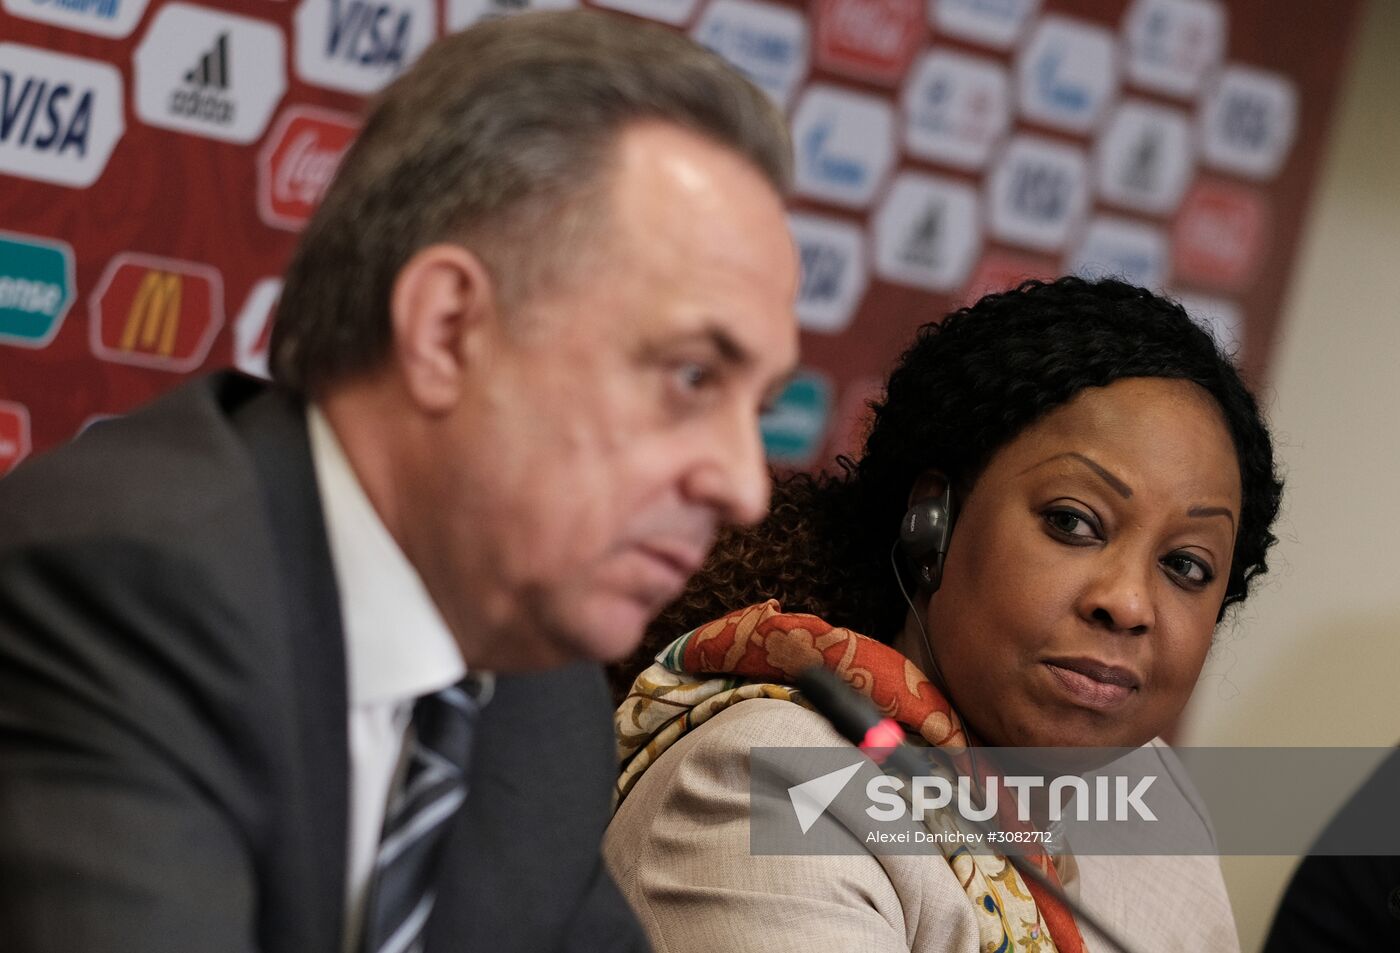 Press briefing following meeting of 2018 FIFA World Cup Russia Organizing Committee Council and FIFA